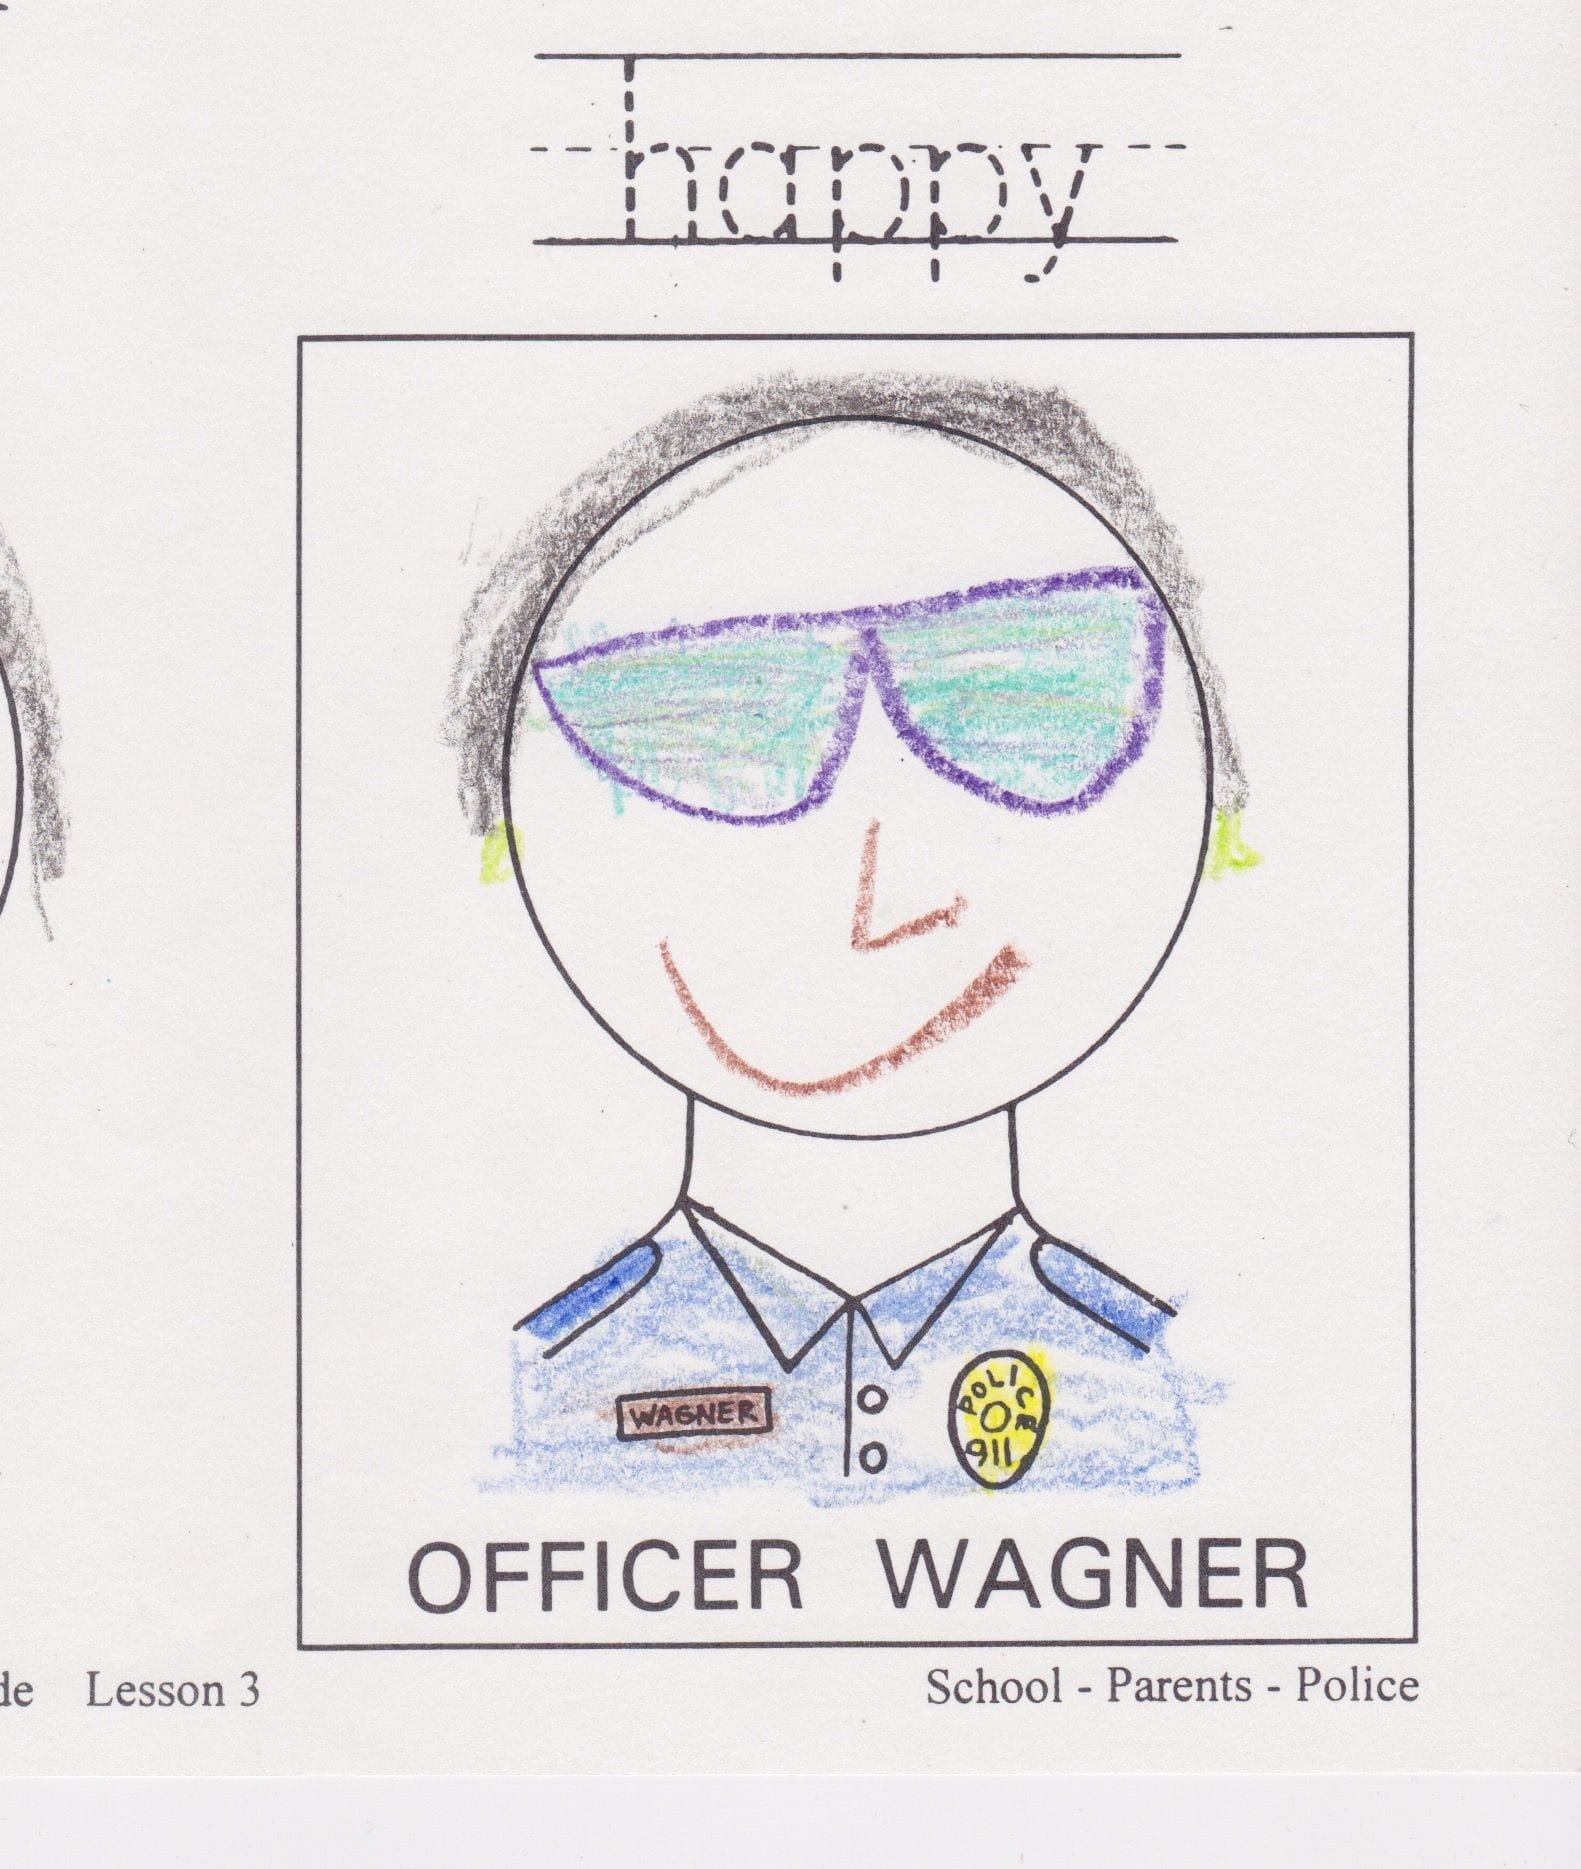 One of the projects for 1st grade students, to trust police officers if they ever needed help, was to color a drawing of Officer Wagner.